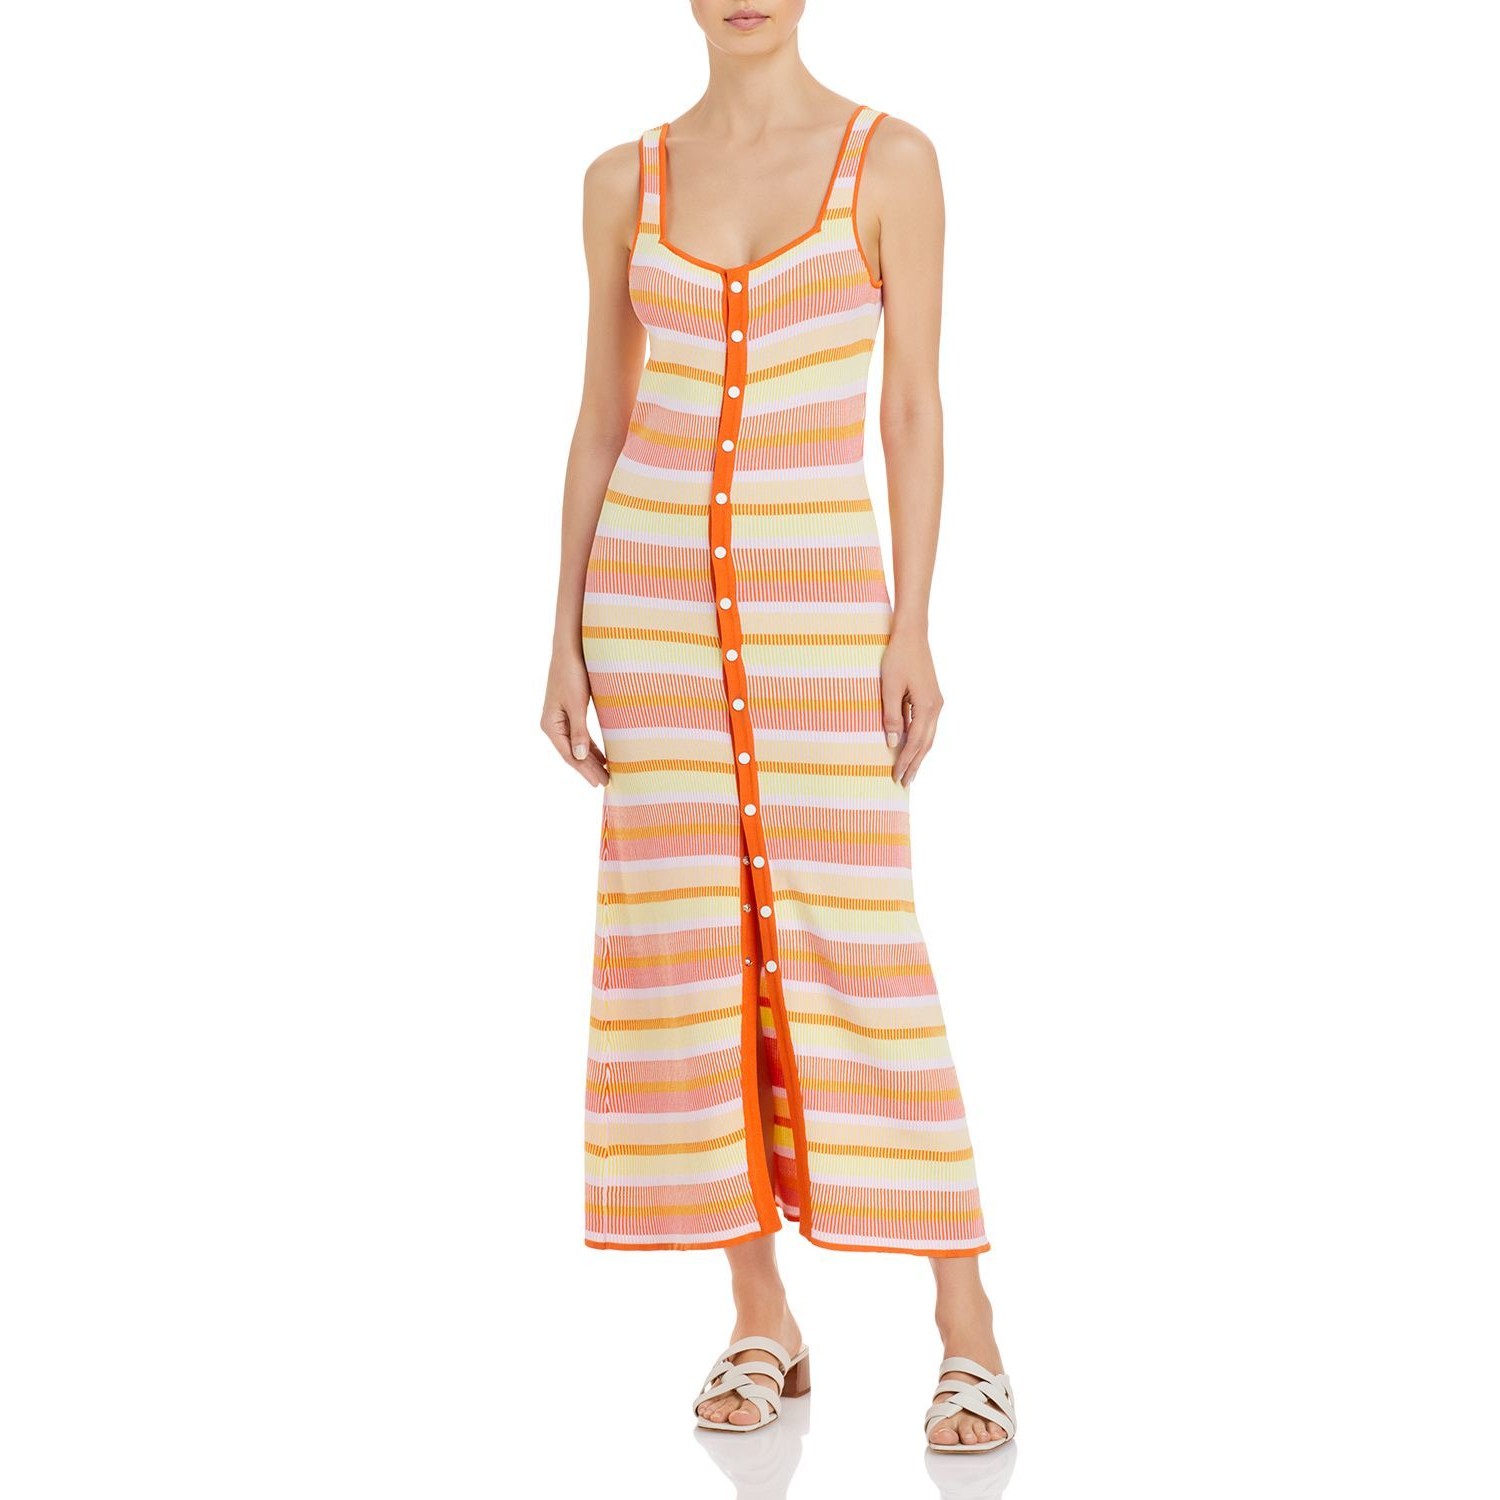 Solid & Striped Kimberly Striped Maxi Cover Up Dress, Multi, Medium